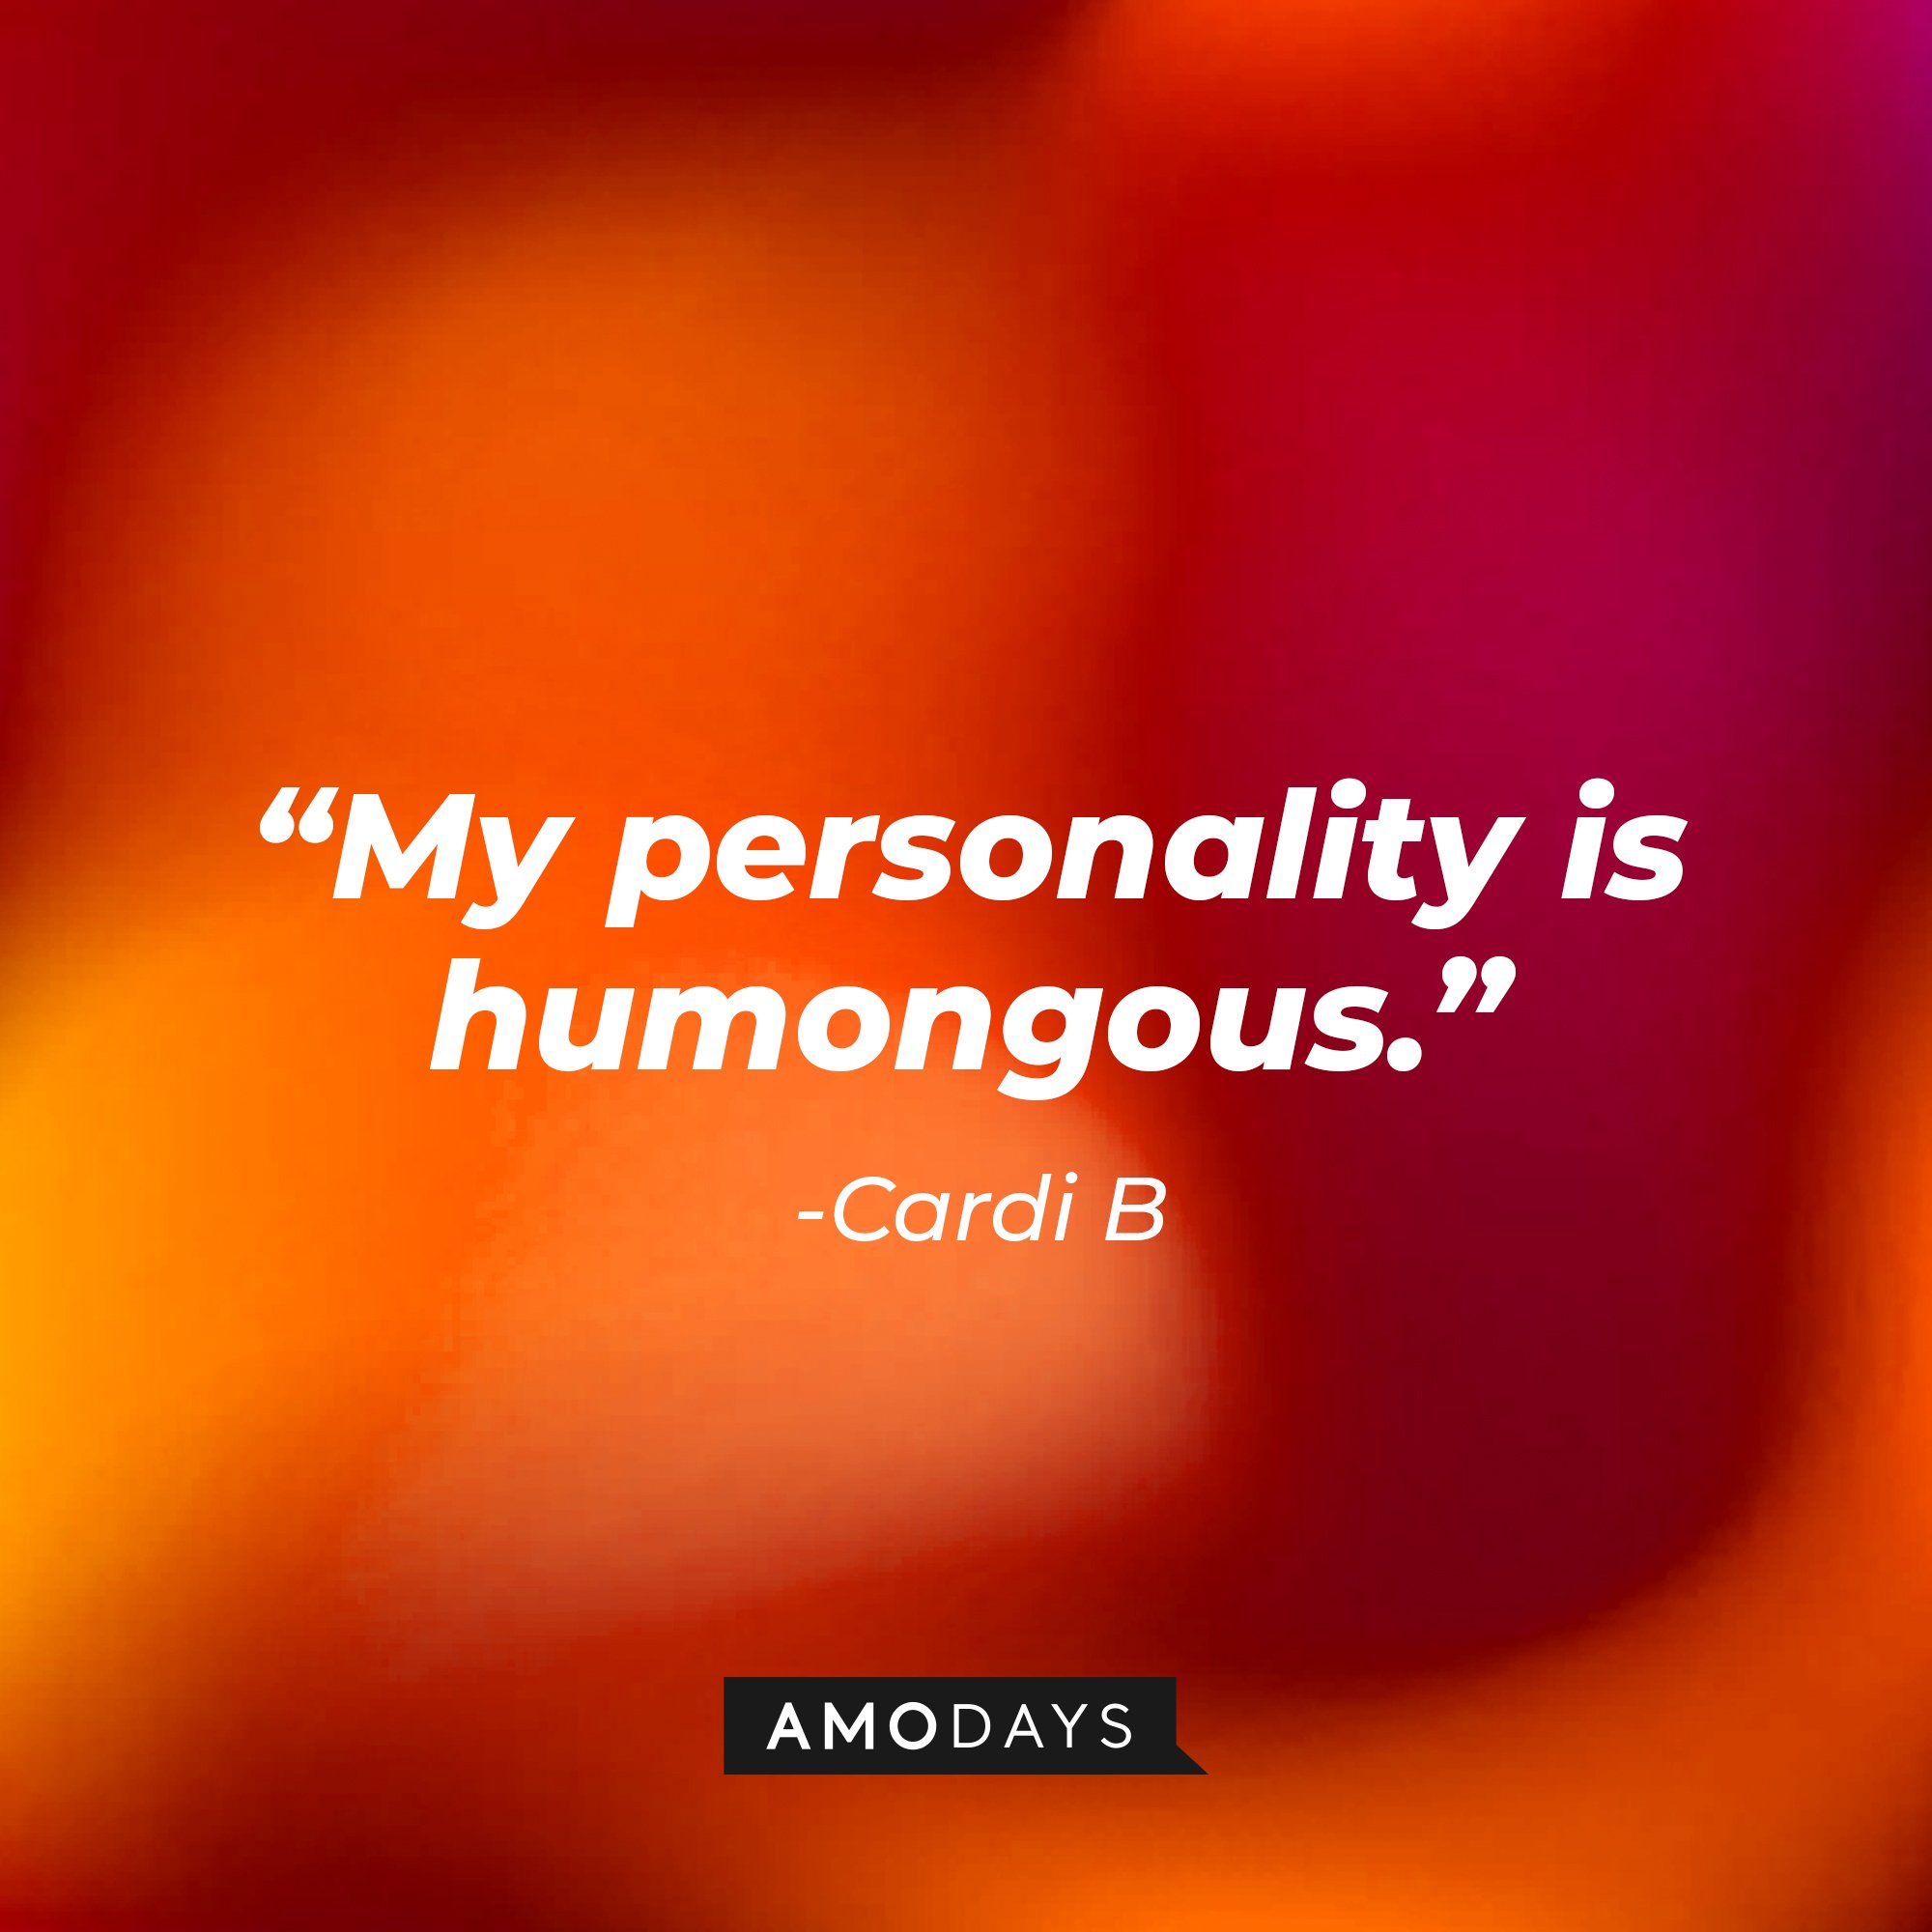 Cardi B's quotes: "My personality is humongous." | Image: AmoDays